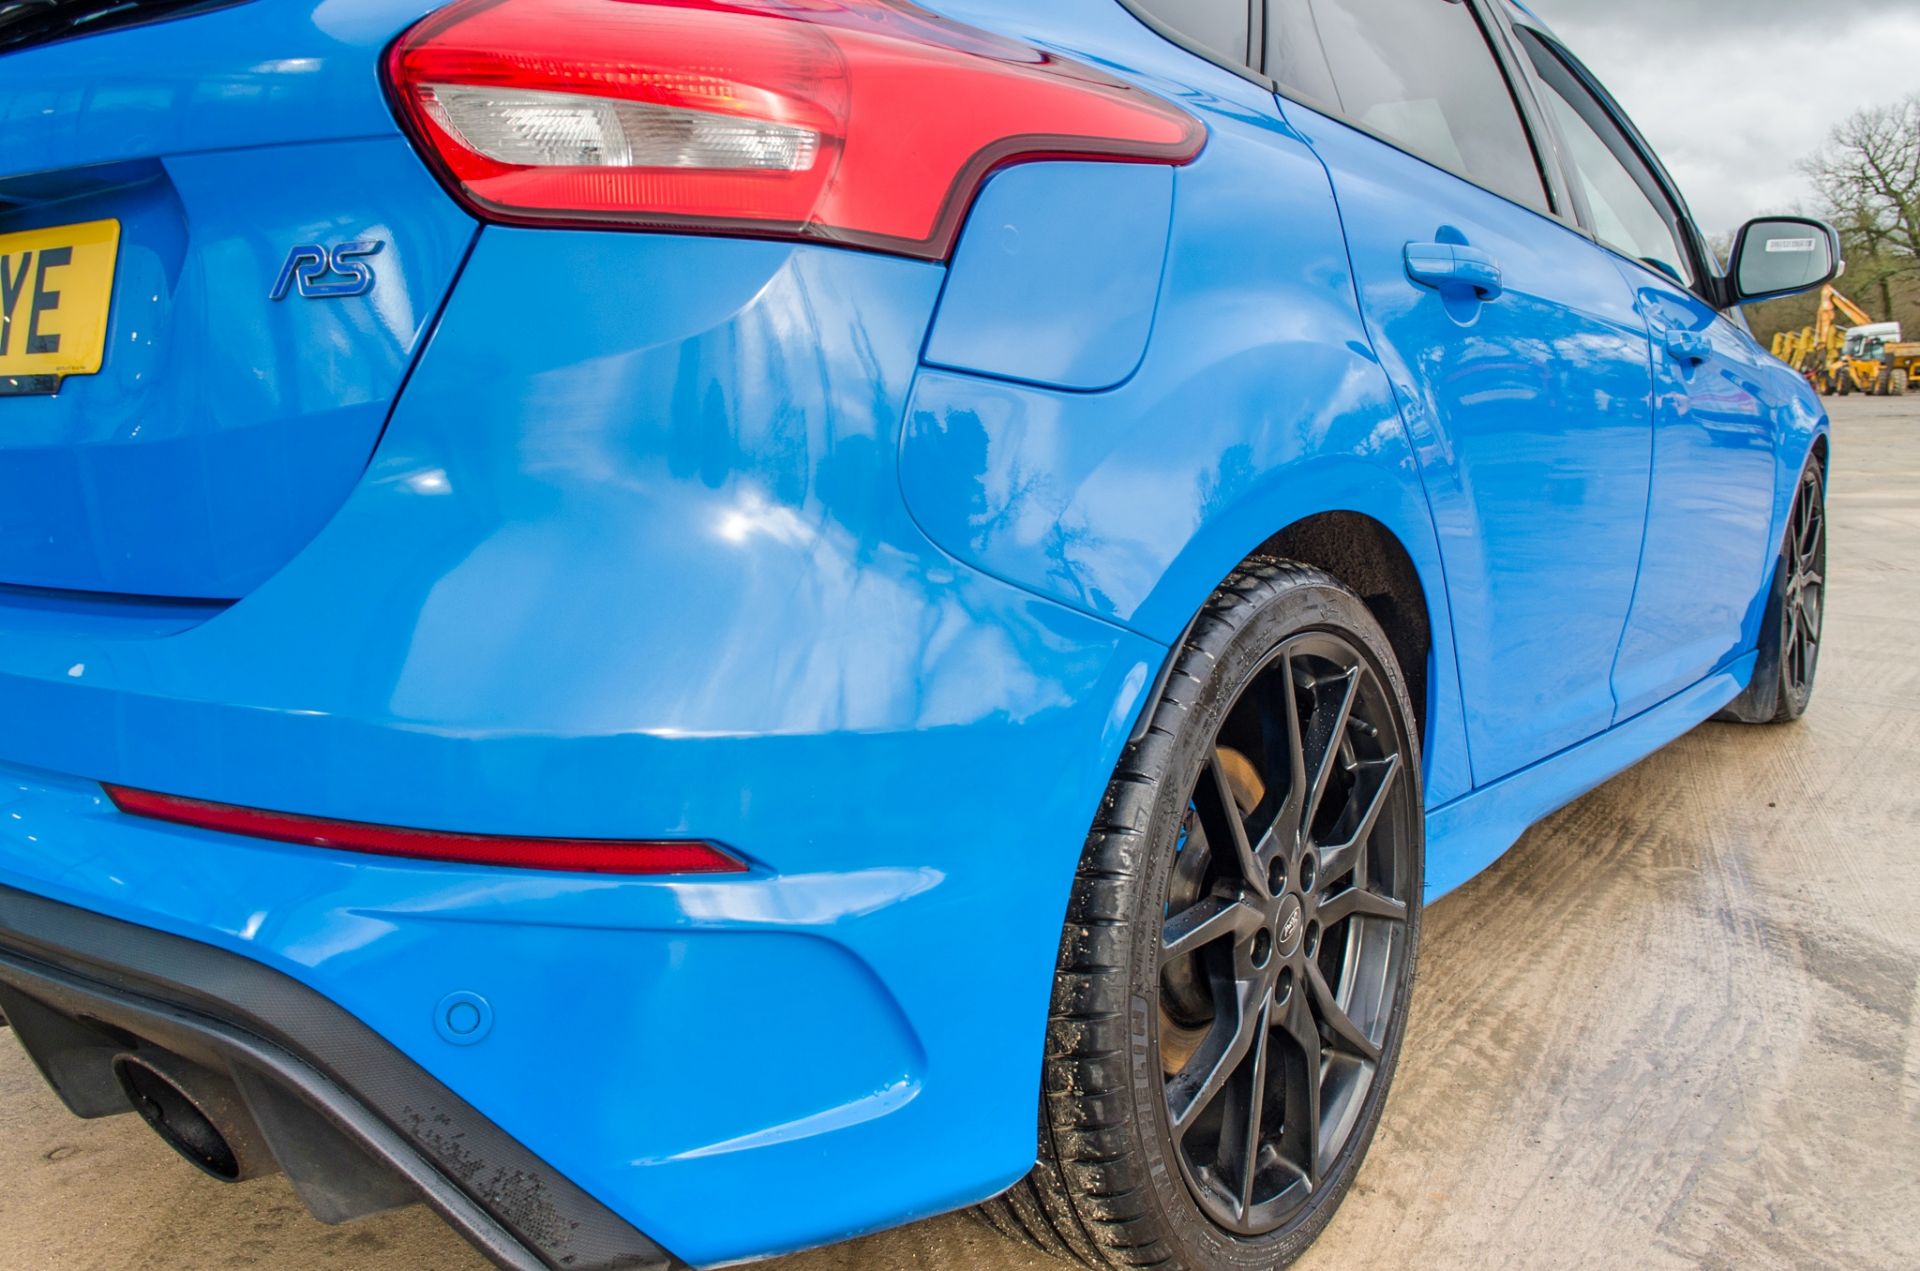 2017 Ford Focus 2.3 RS 5 door hatch back - Image 19 of 56